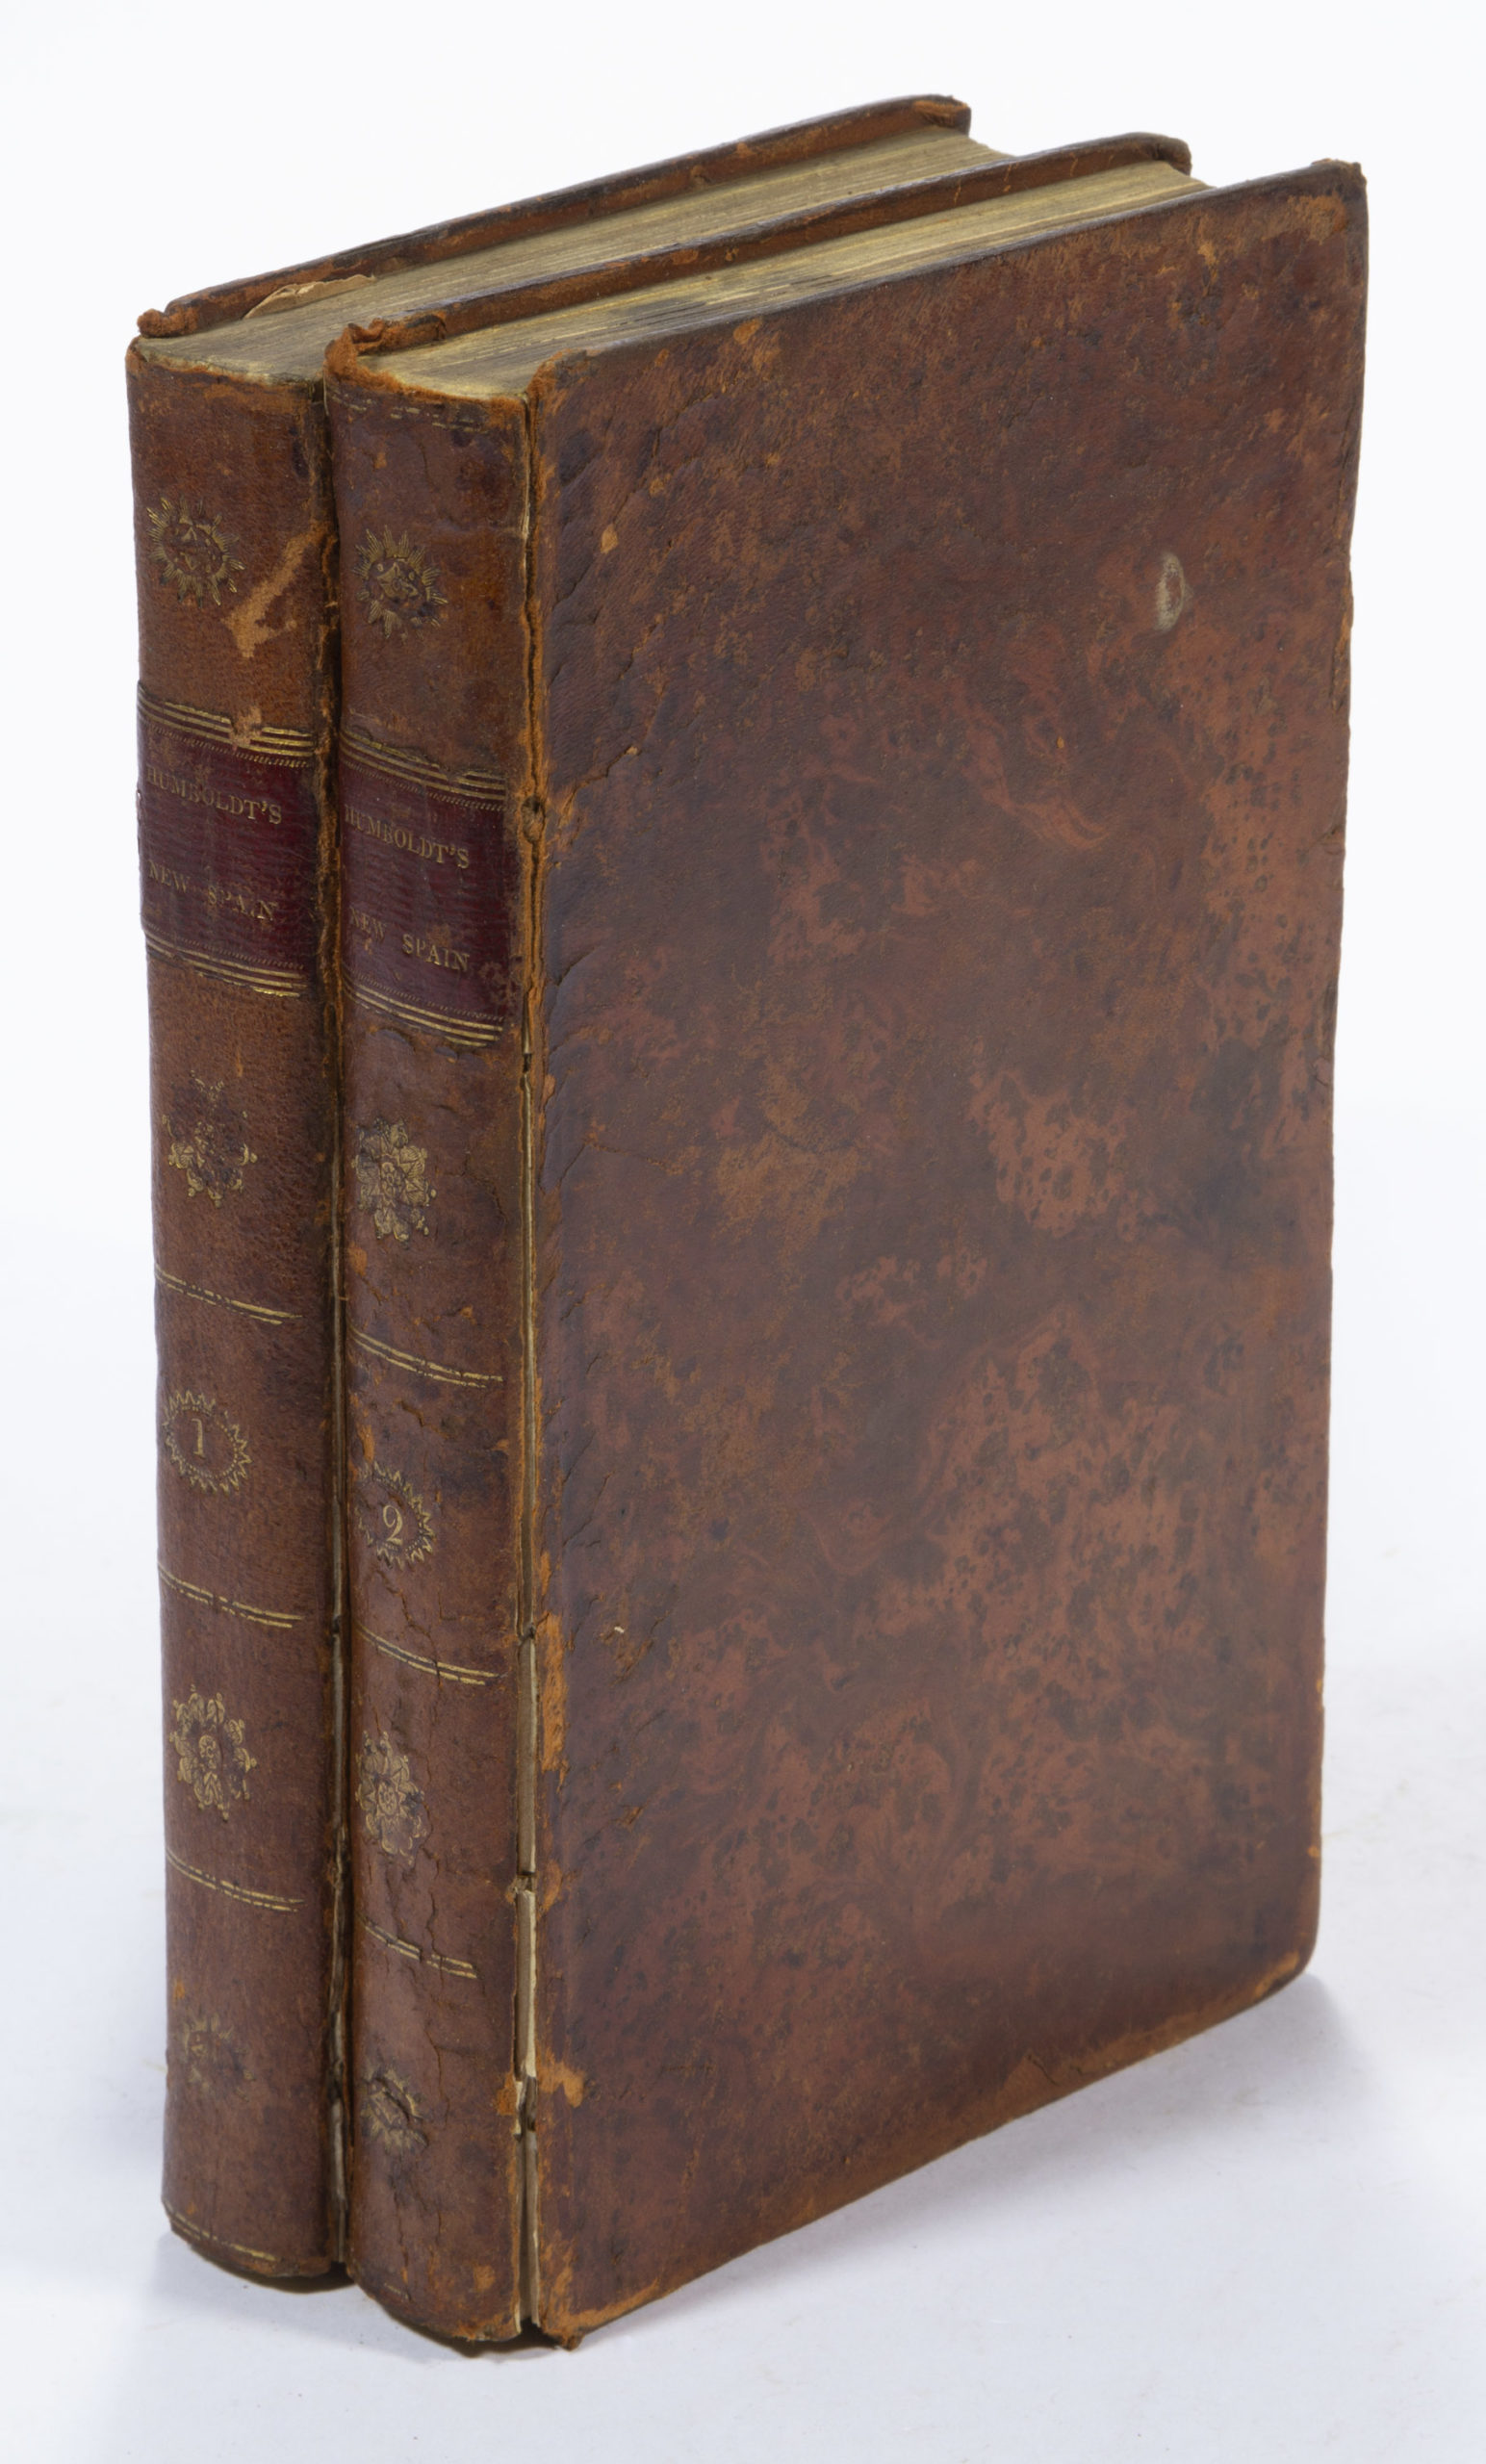 ANTIQUARIAN MEXICO AND SOUTHWESTERN UNITED STATES TRAVEL TWO VOLUMES,